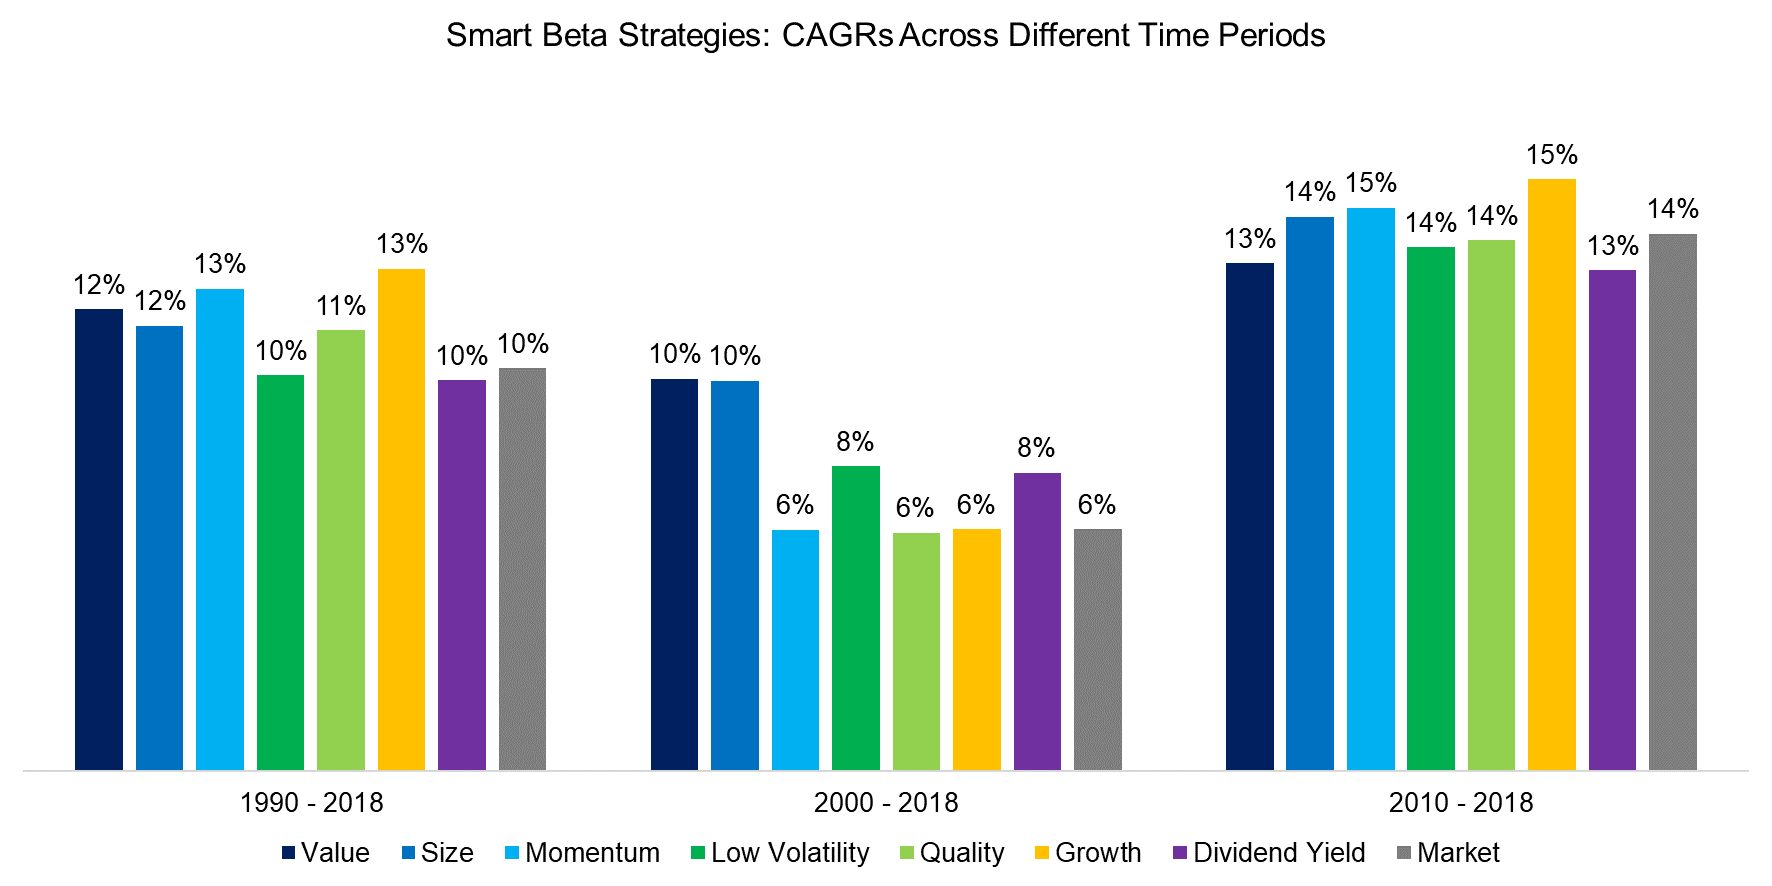 Smart Beta Strategies CAGRs Across Different Time Periods